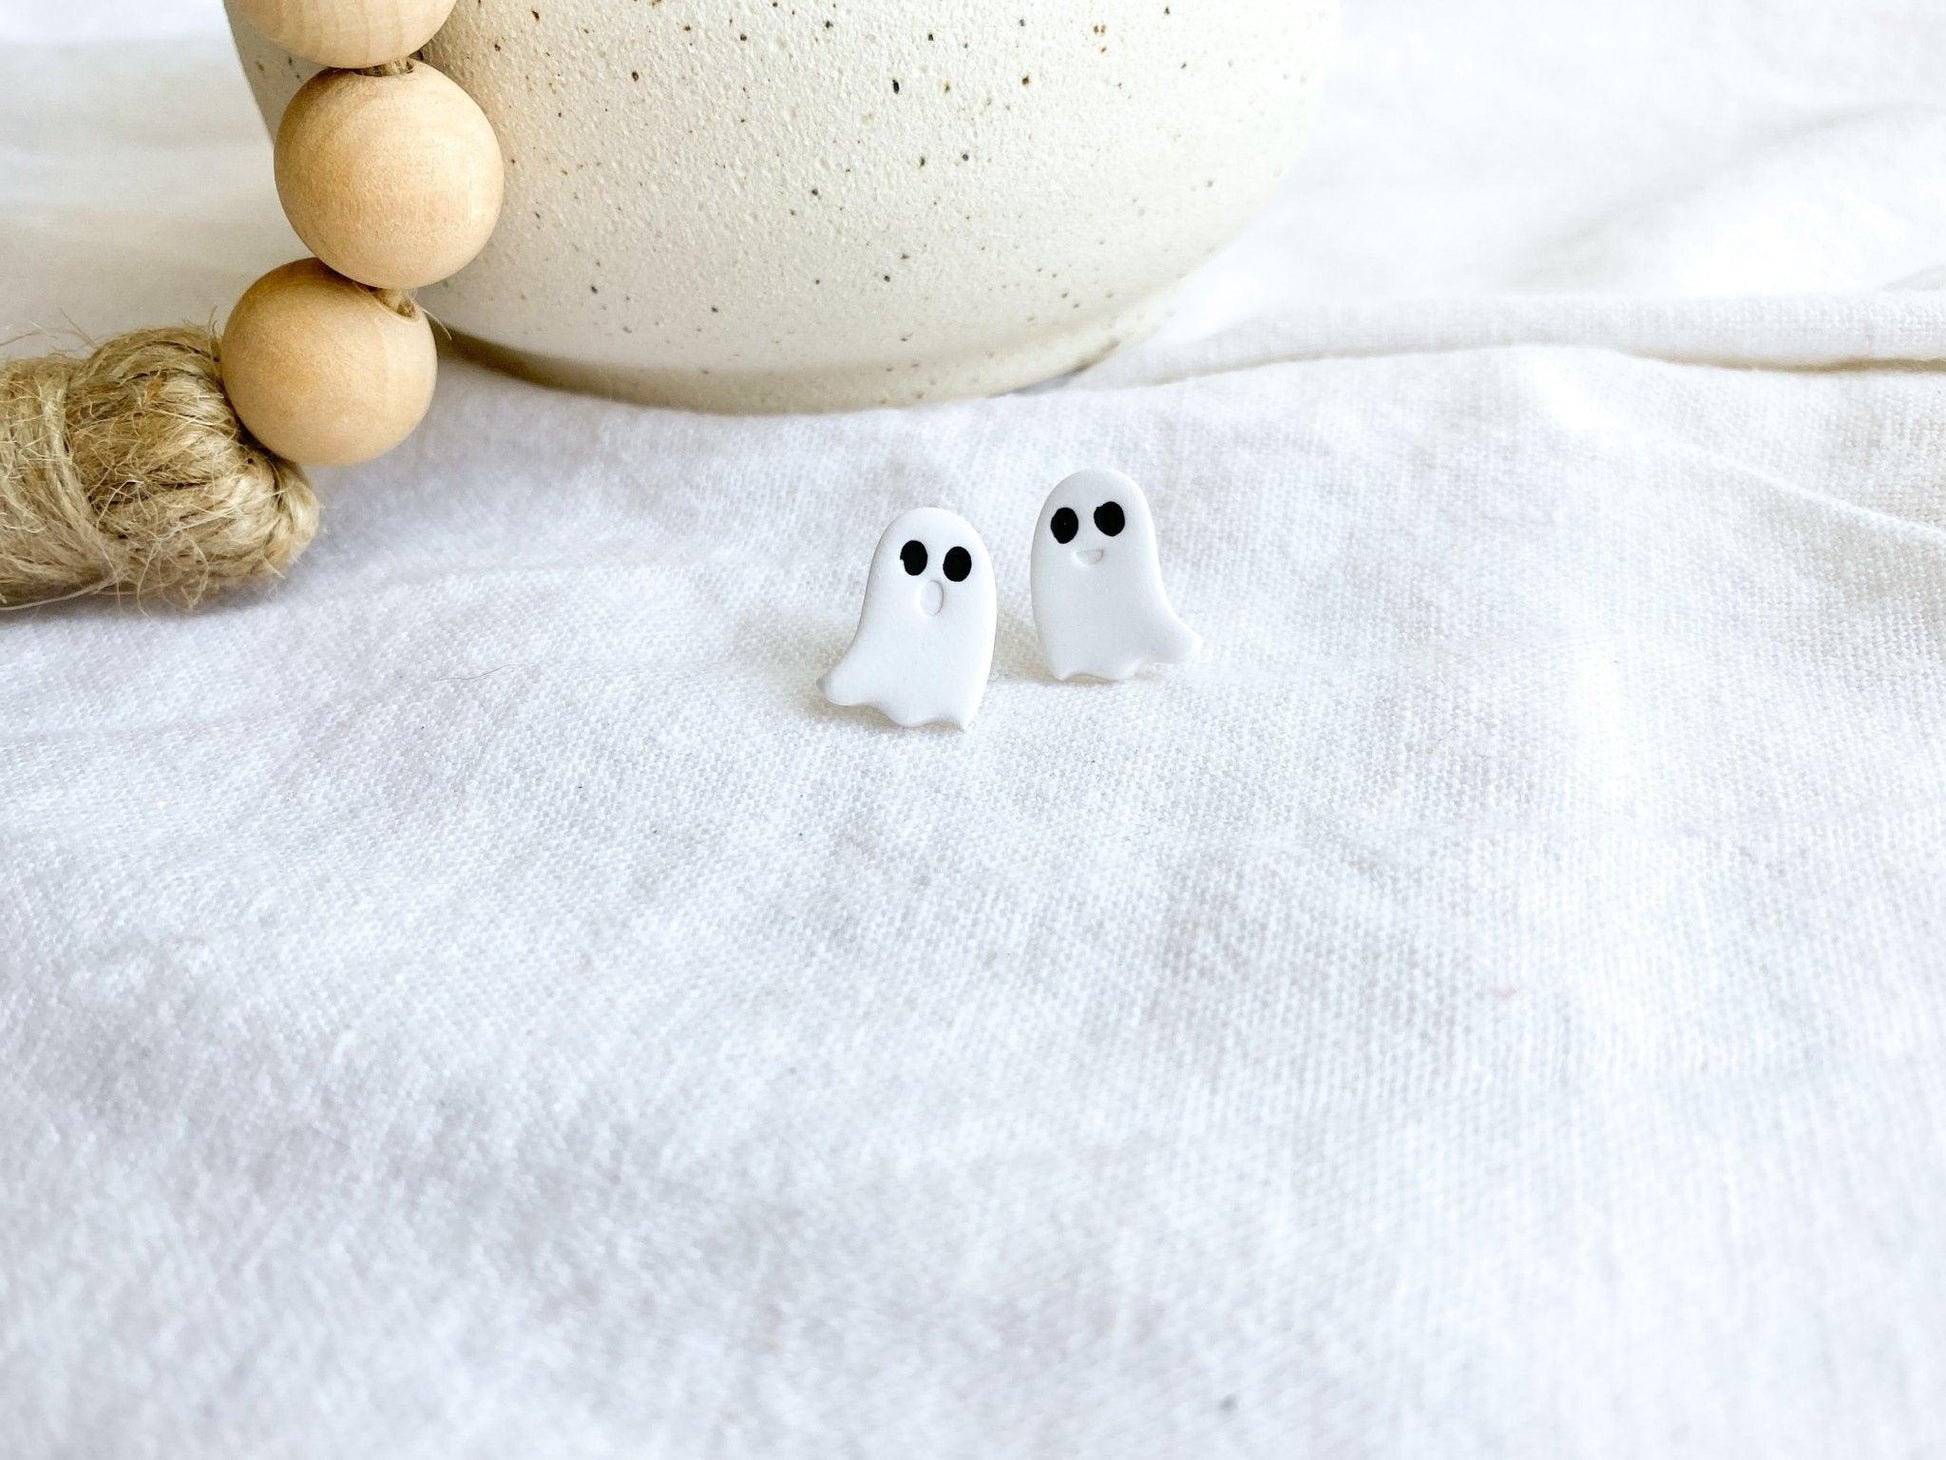 Small Handmade White Ghost Stud Earrings with Surgical Steel Posts on White Linen Cloth